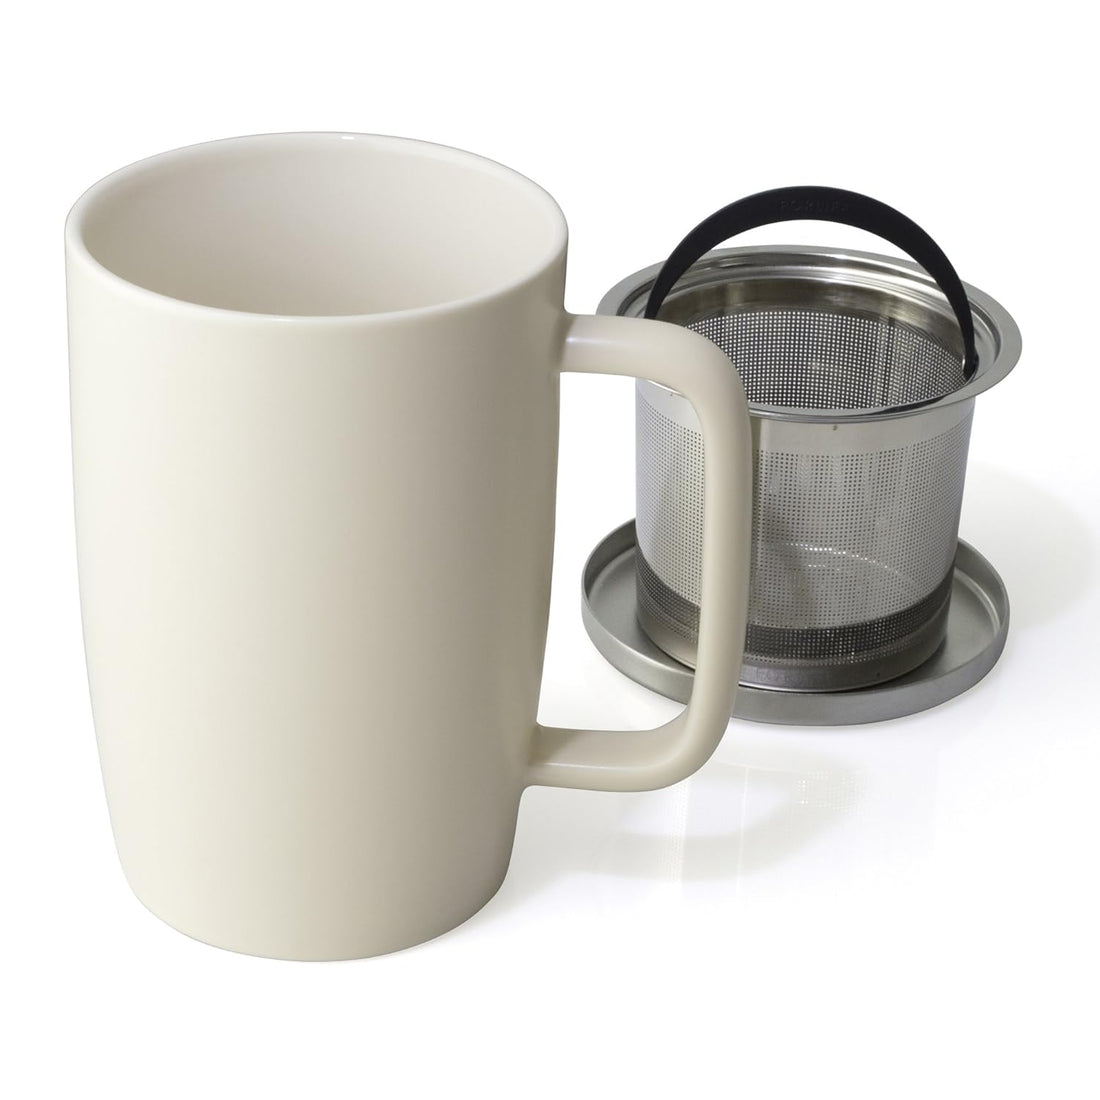 FORLIFE Dew Satin Finish Brew-in-Mug with Basket Infuser & Stainless Lid 18 oz, Natural Cotton